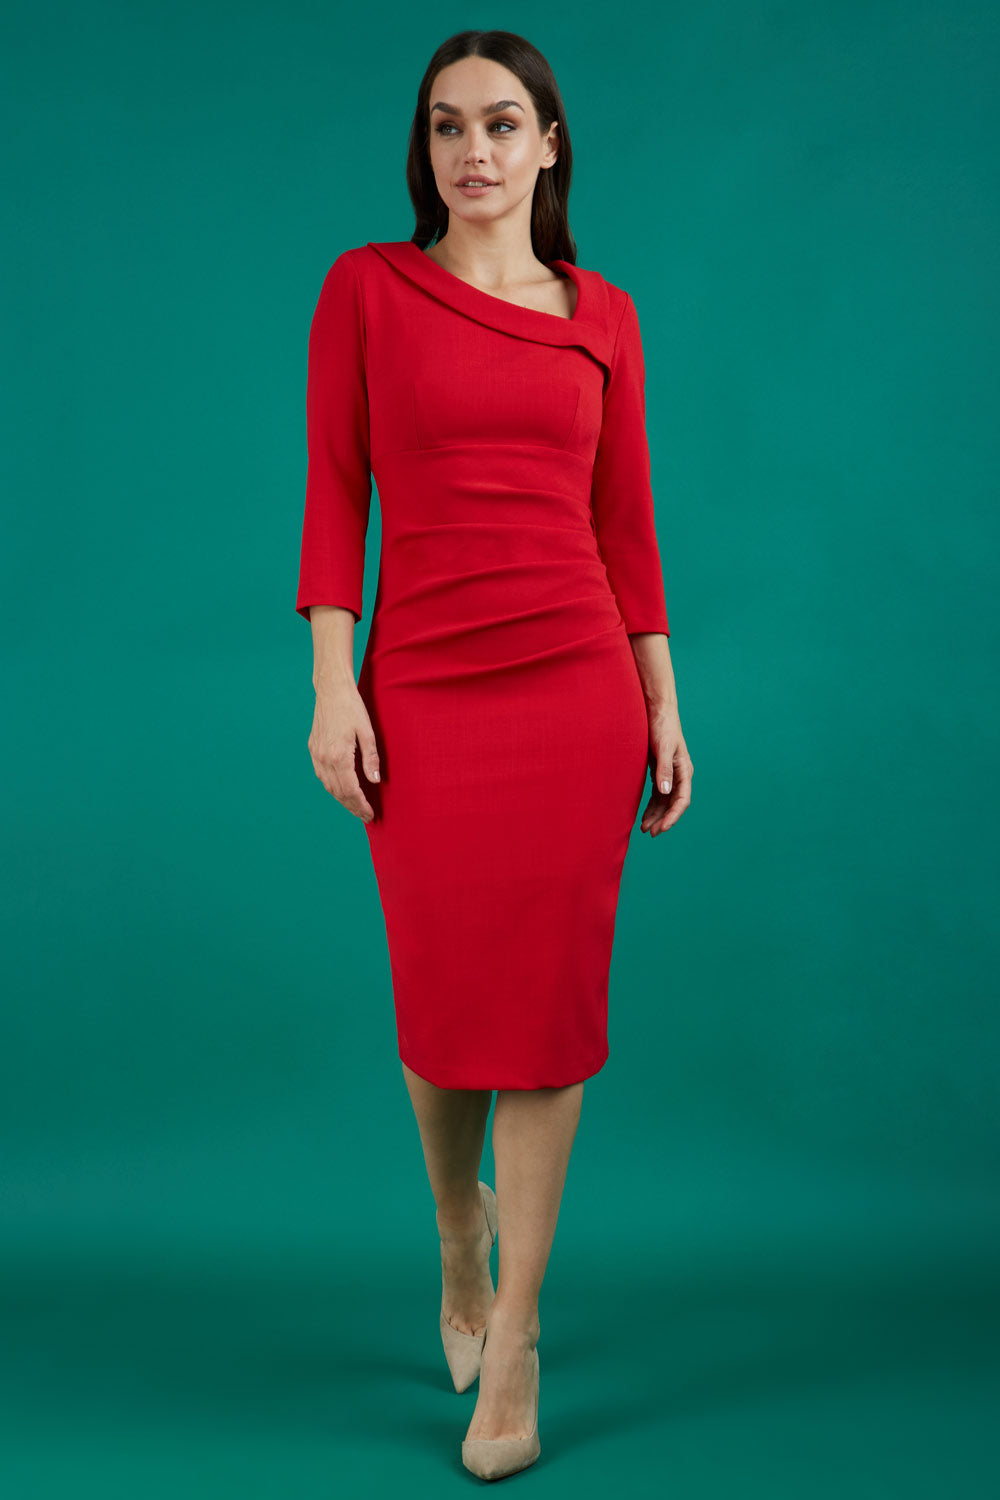 Brunette model is wearing a red pencil three quarter sleeve dress with assymetric neckline and pleating around tummy area